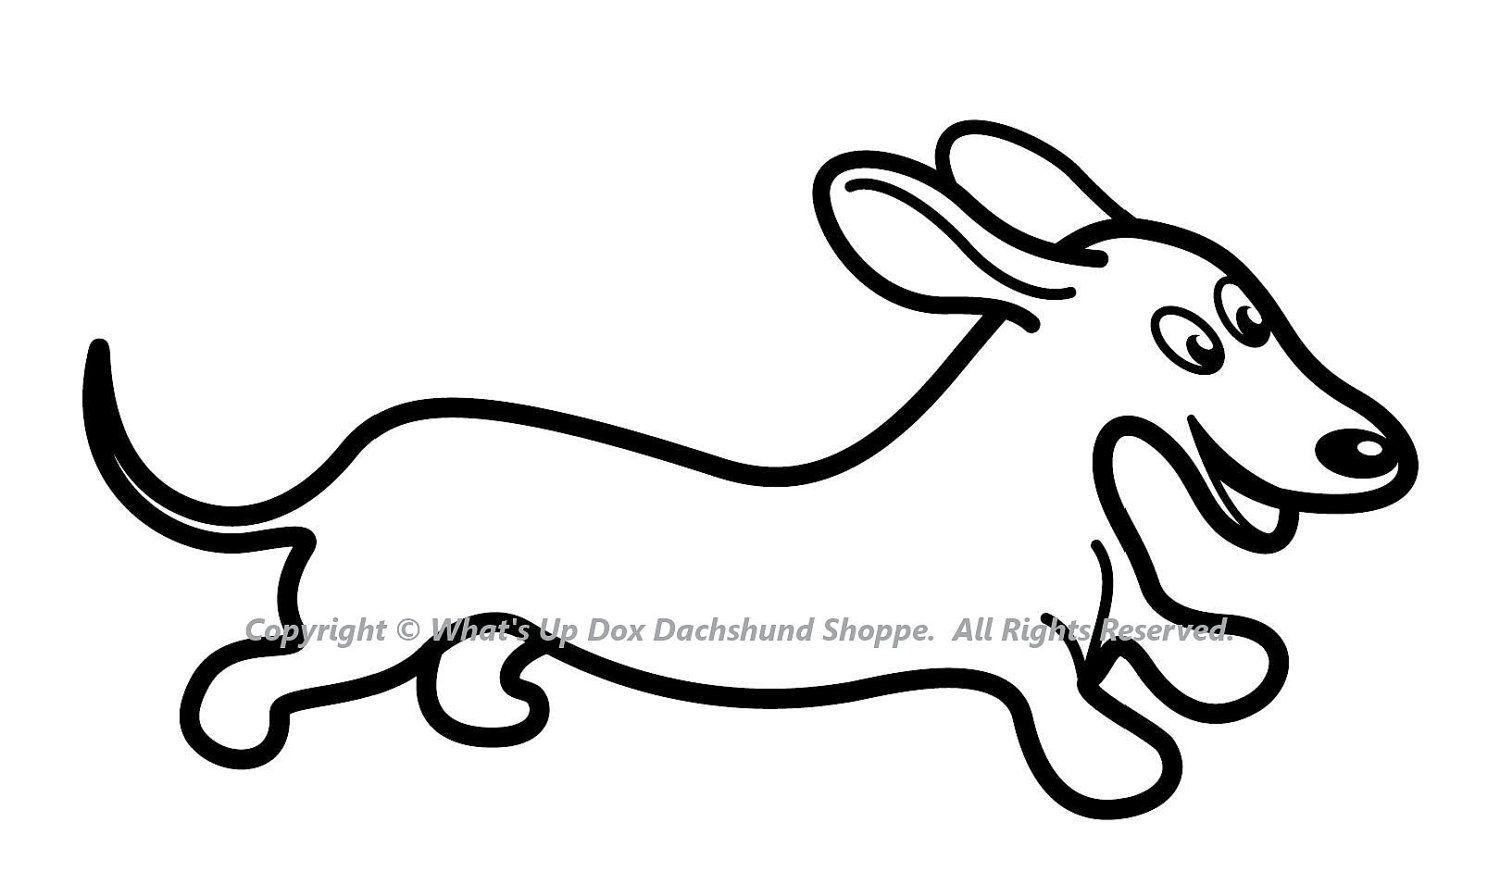 Dachshund Coloring Pages (18 Pictures) - Colorine.net | 1899